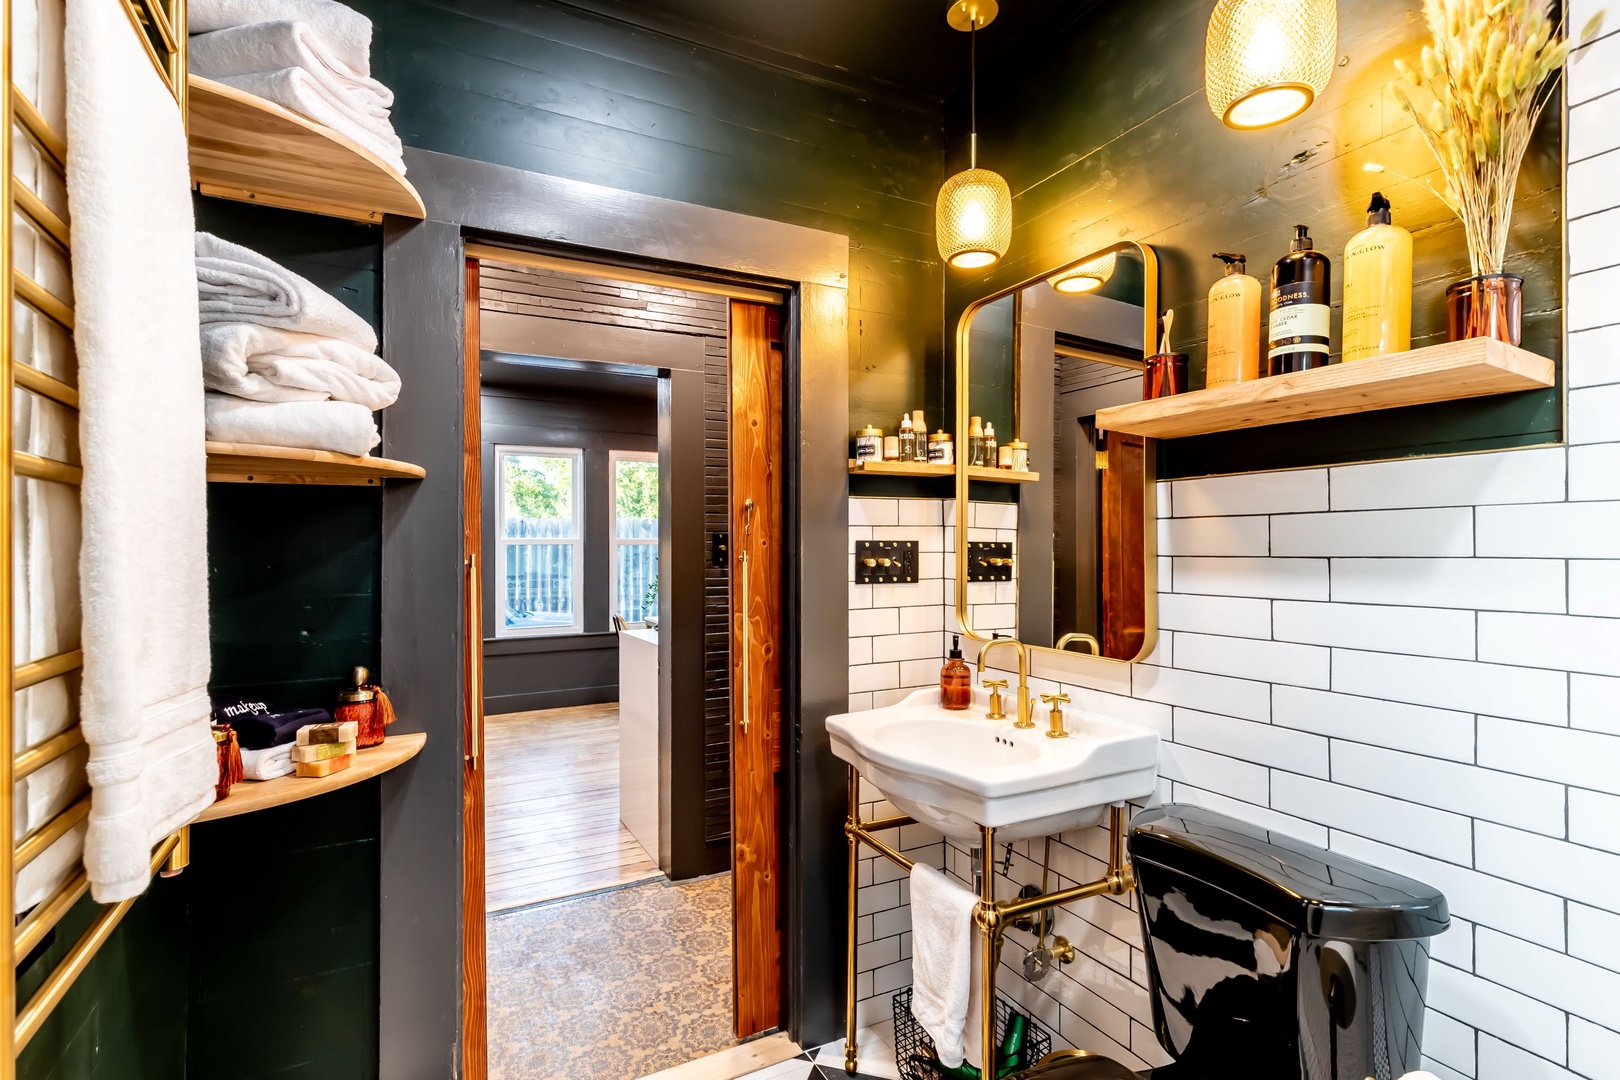 The full bathroom offers a shower & historic charm balanced with modern updates